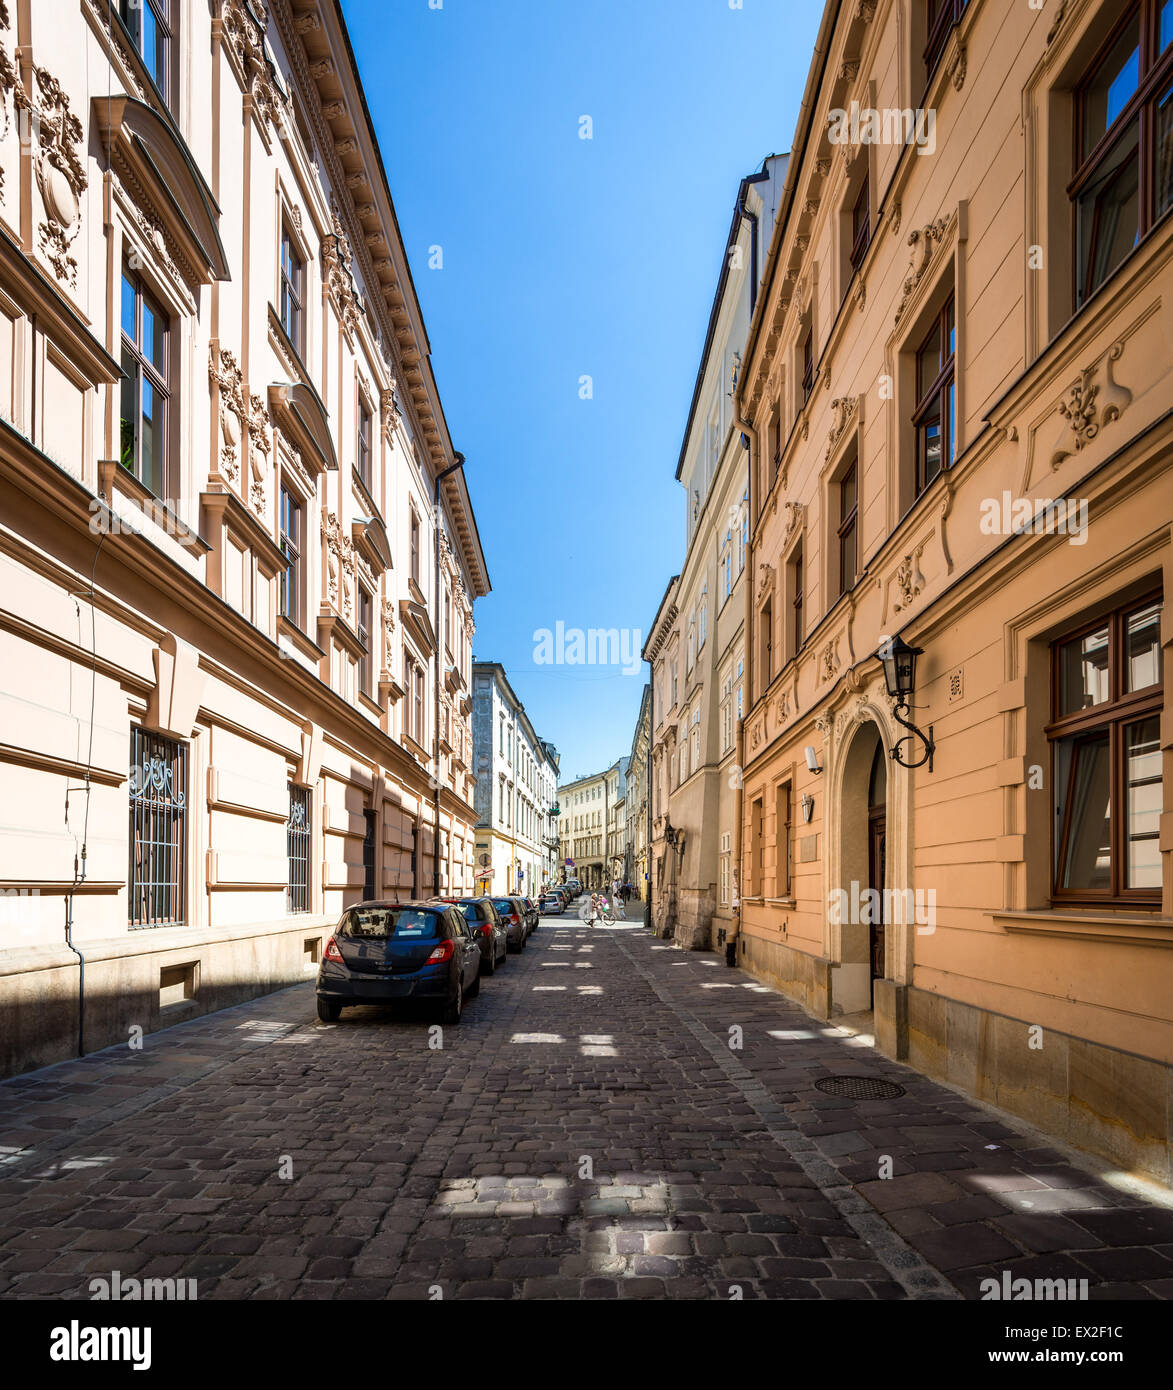 Cars parked near houses in street in Krakow, Poland, Europe. Empty lane in morning. Blue sky and good weather for tourists. Stock Photo